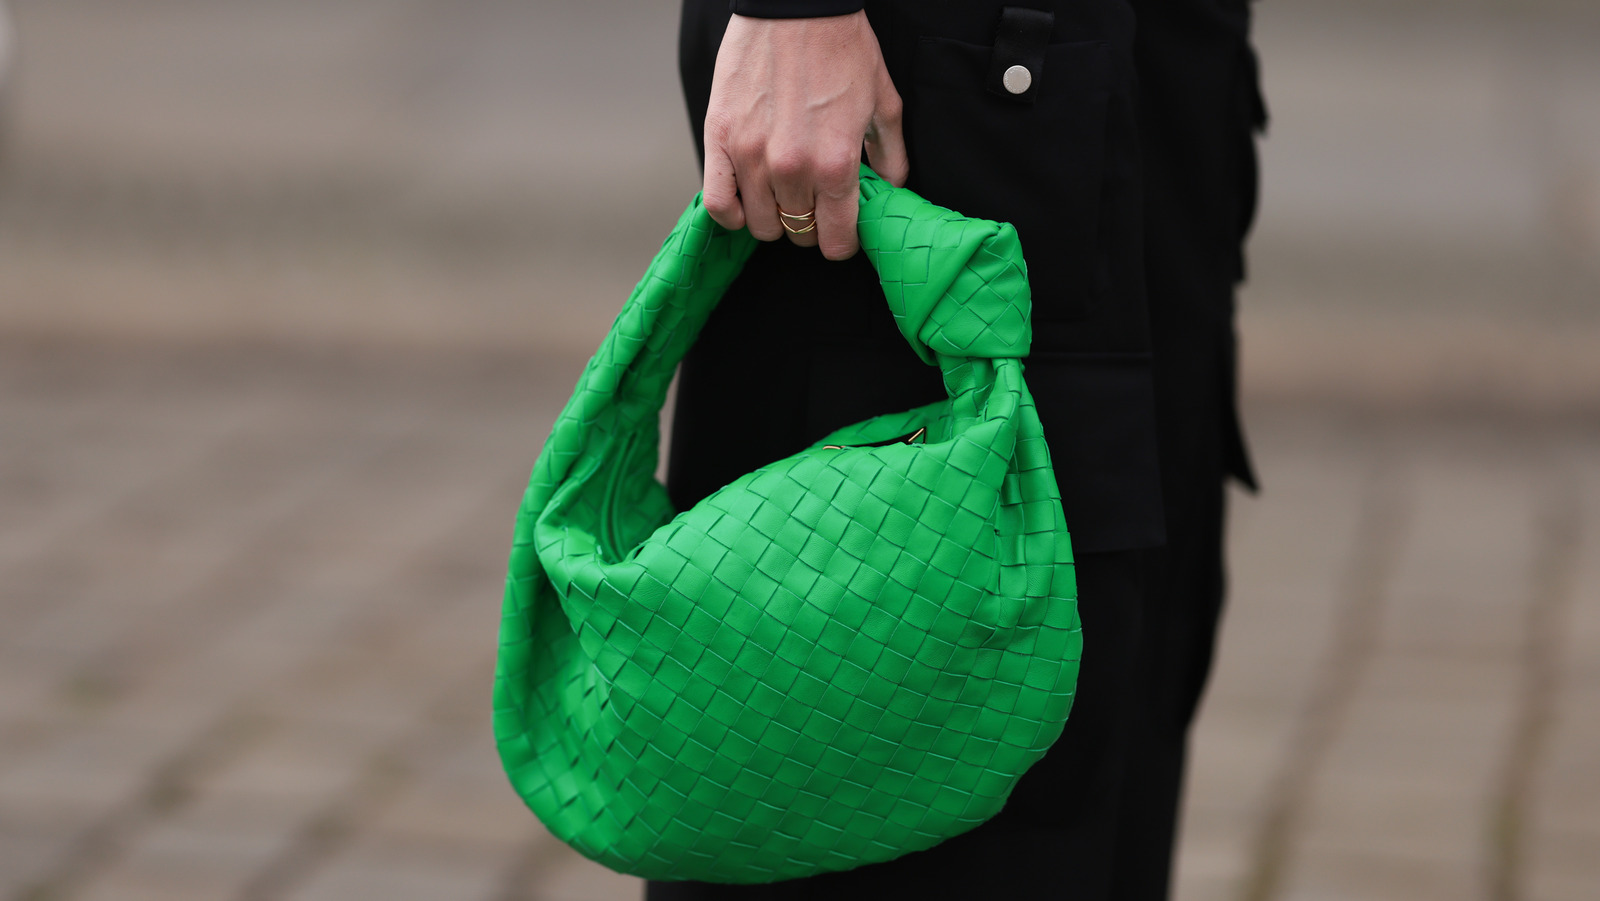 Bottega Green: Photos of the Color on the Runway and in